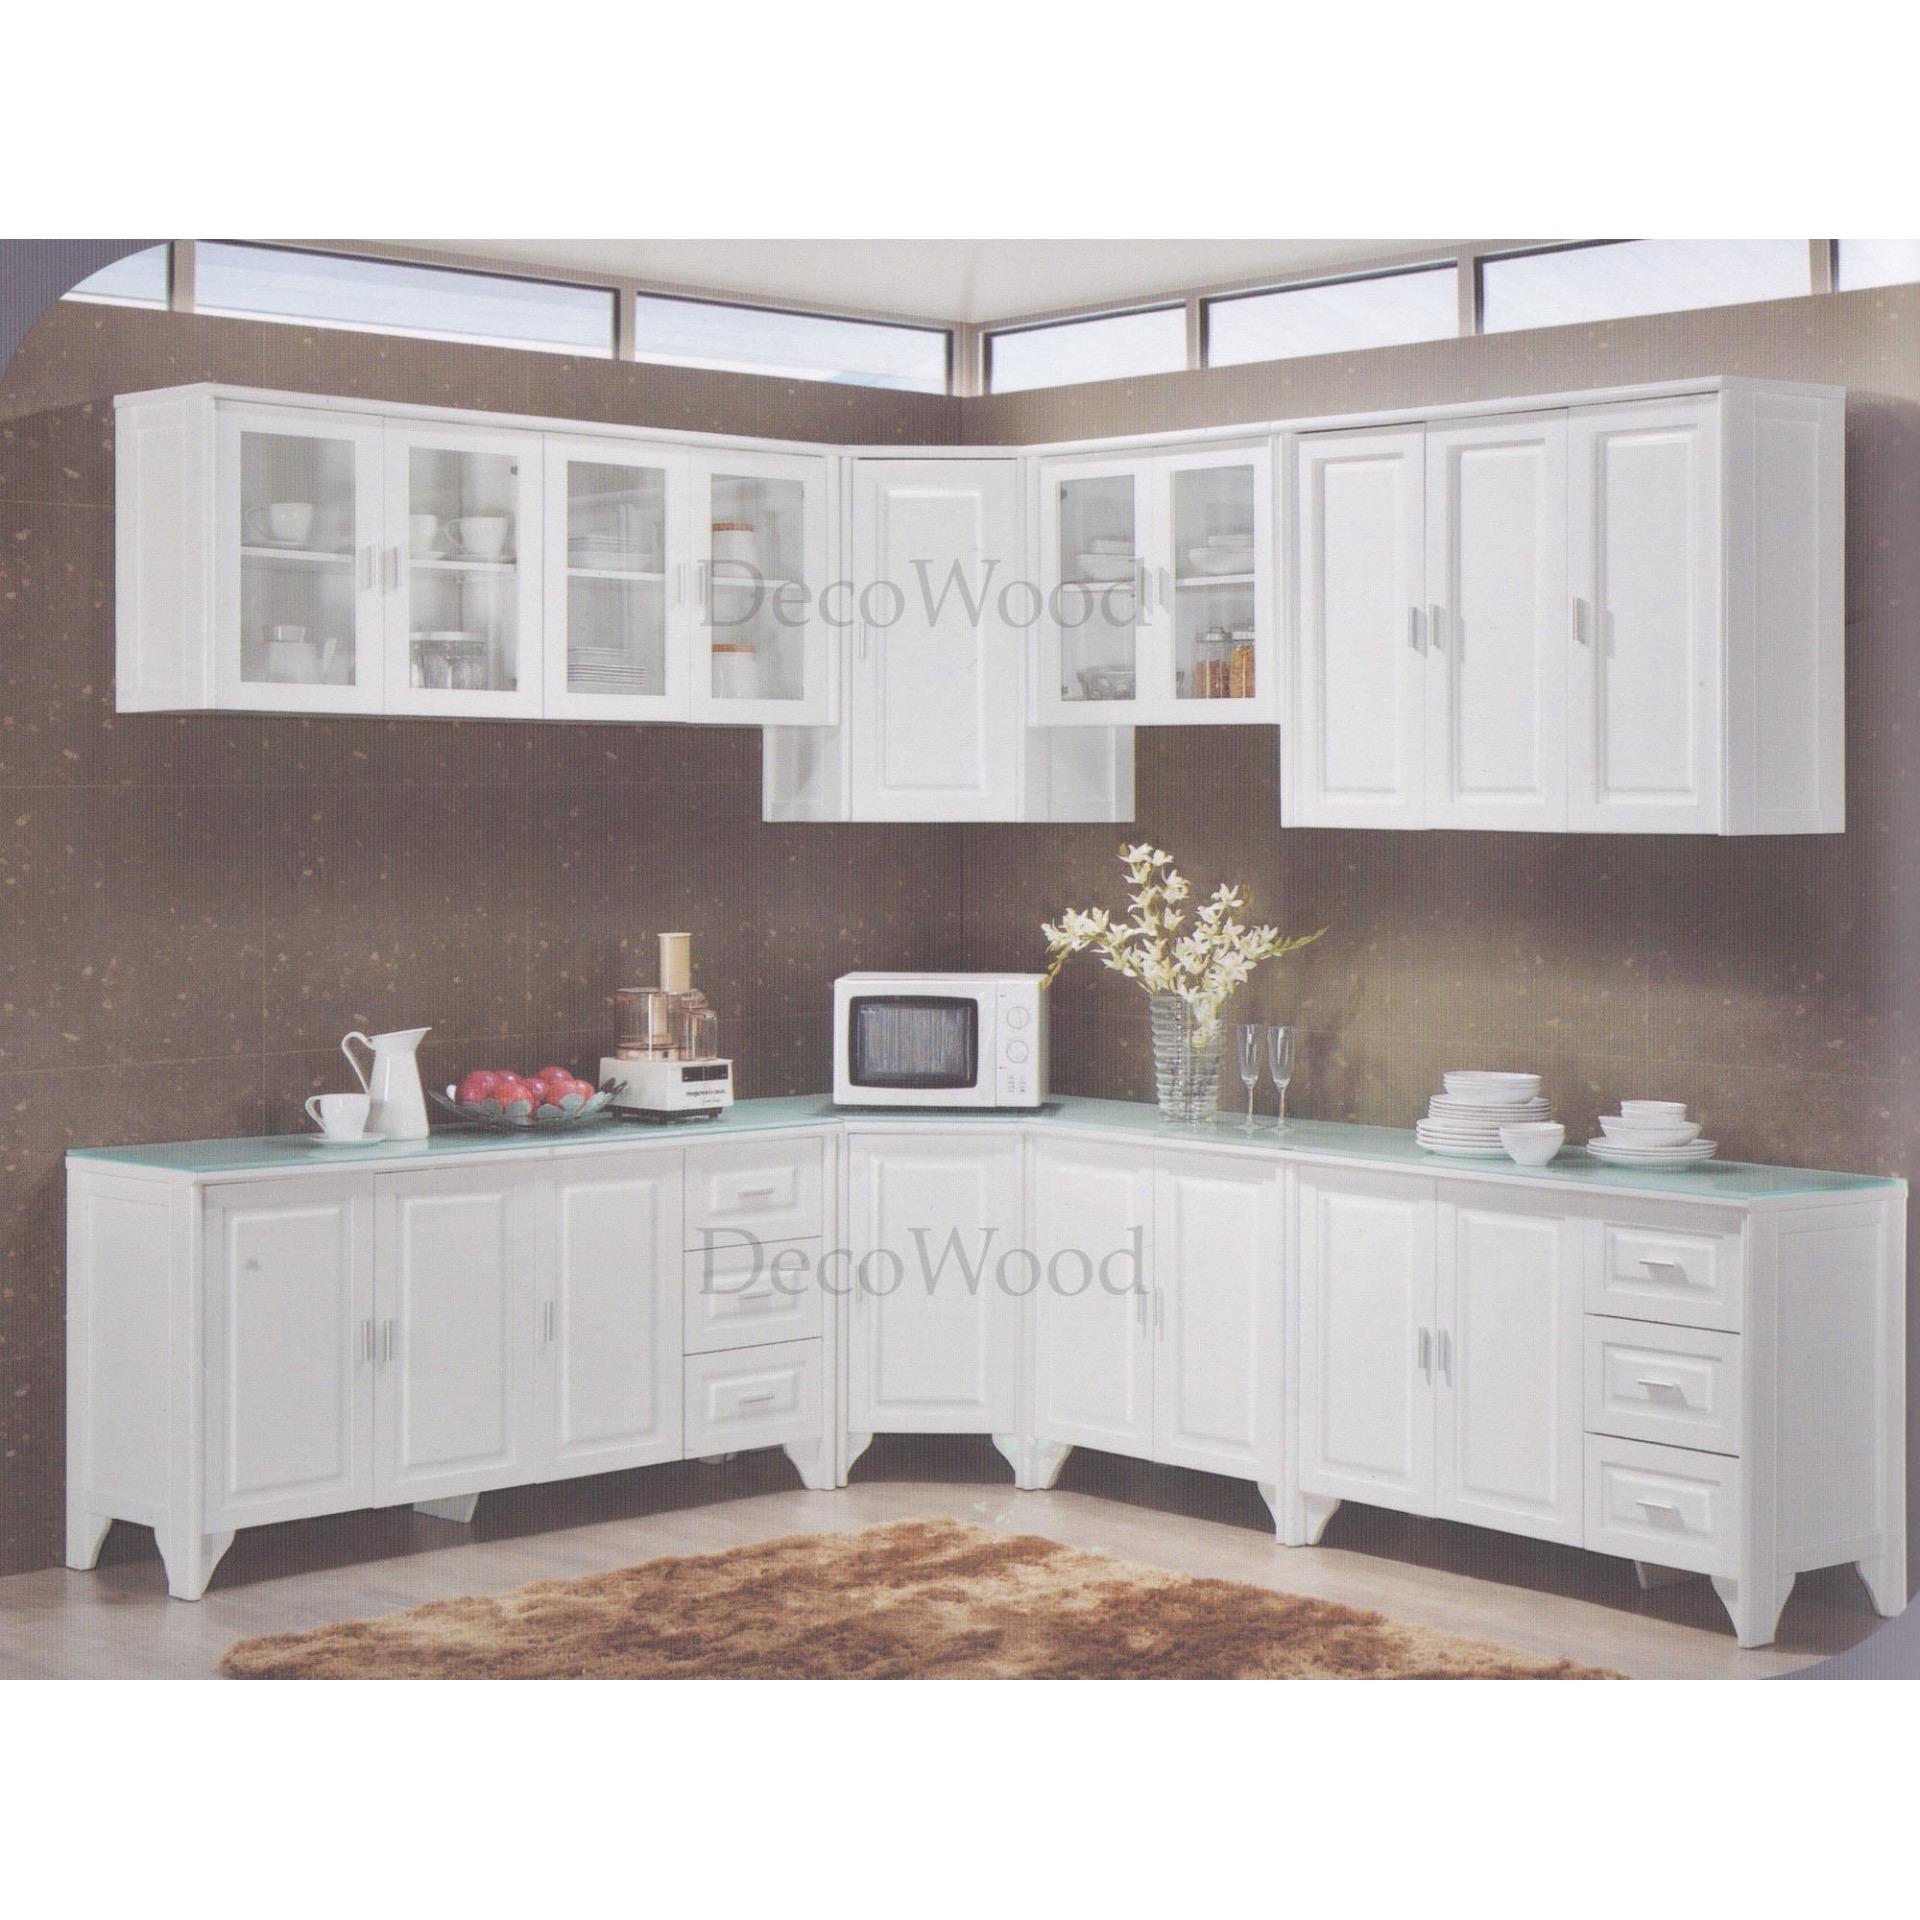 4 Feet Solid Strong Kitchen Cabinet End 5 1 2021 12 00 Am